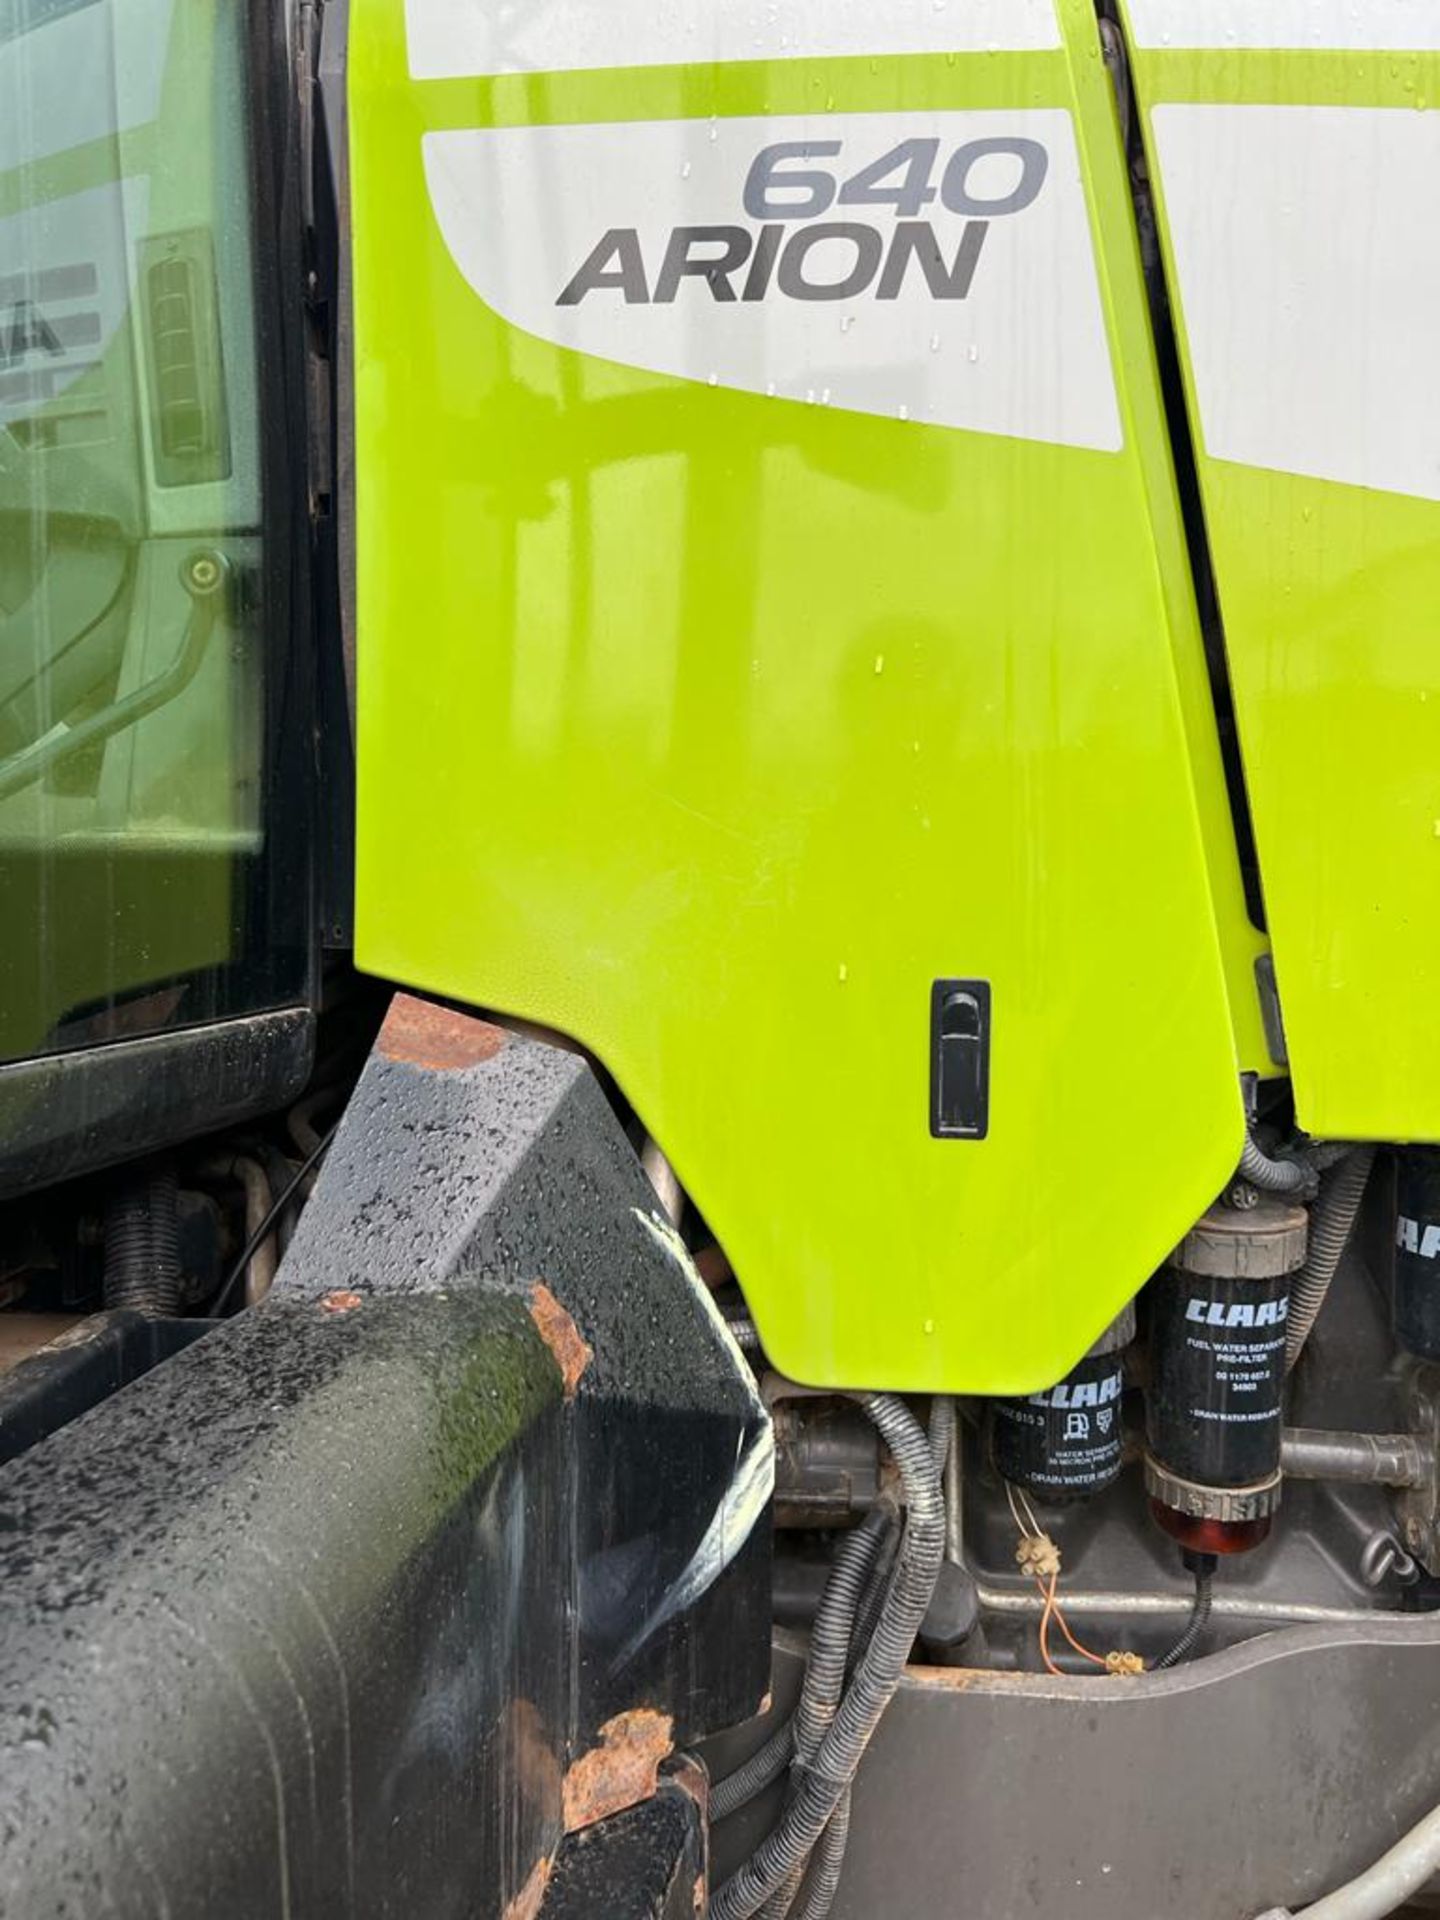 CLAAS ARION 640 TRACTOR, 2012, FRONT AND CAB SUSPENSION - Image 2 of 10